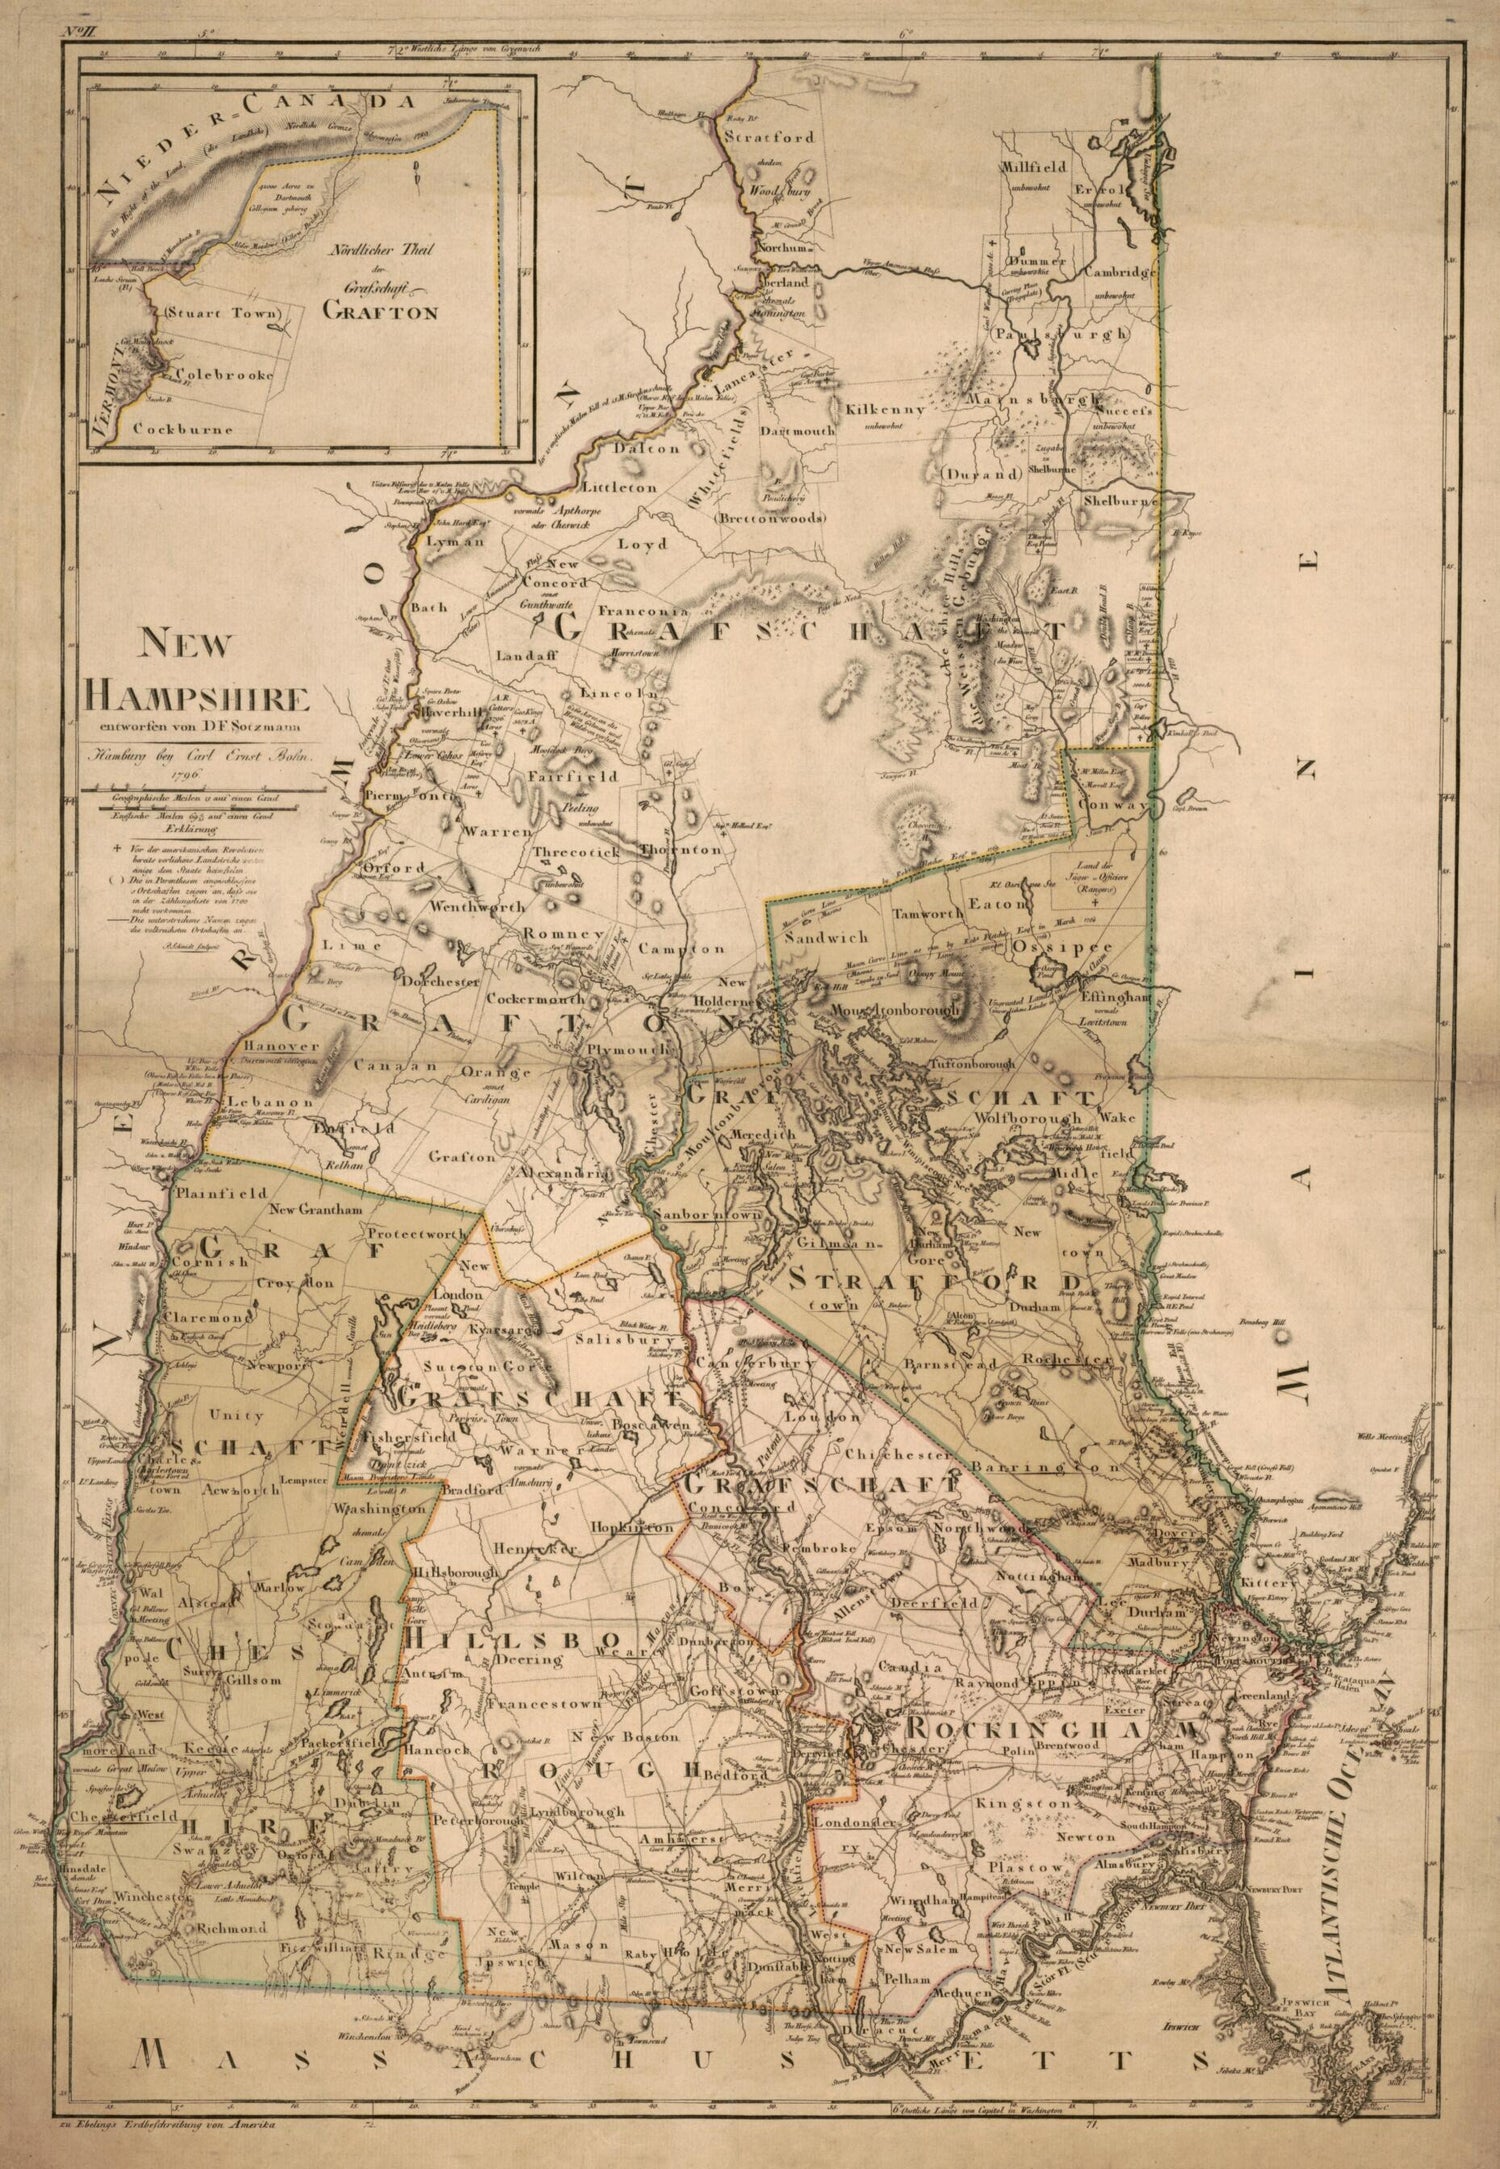 This old map of New Hampshire from 1796 was created by Carl Ernst Bohn, Paulus Schmidt, D. F. Sotzmann in 1796